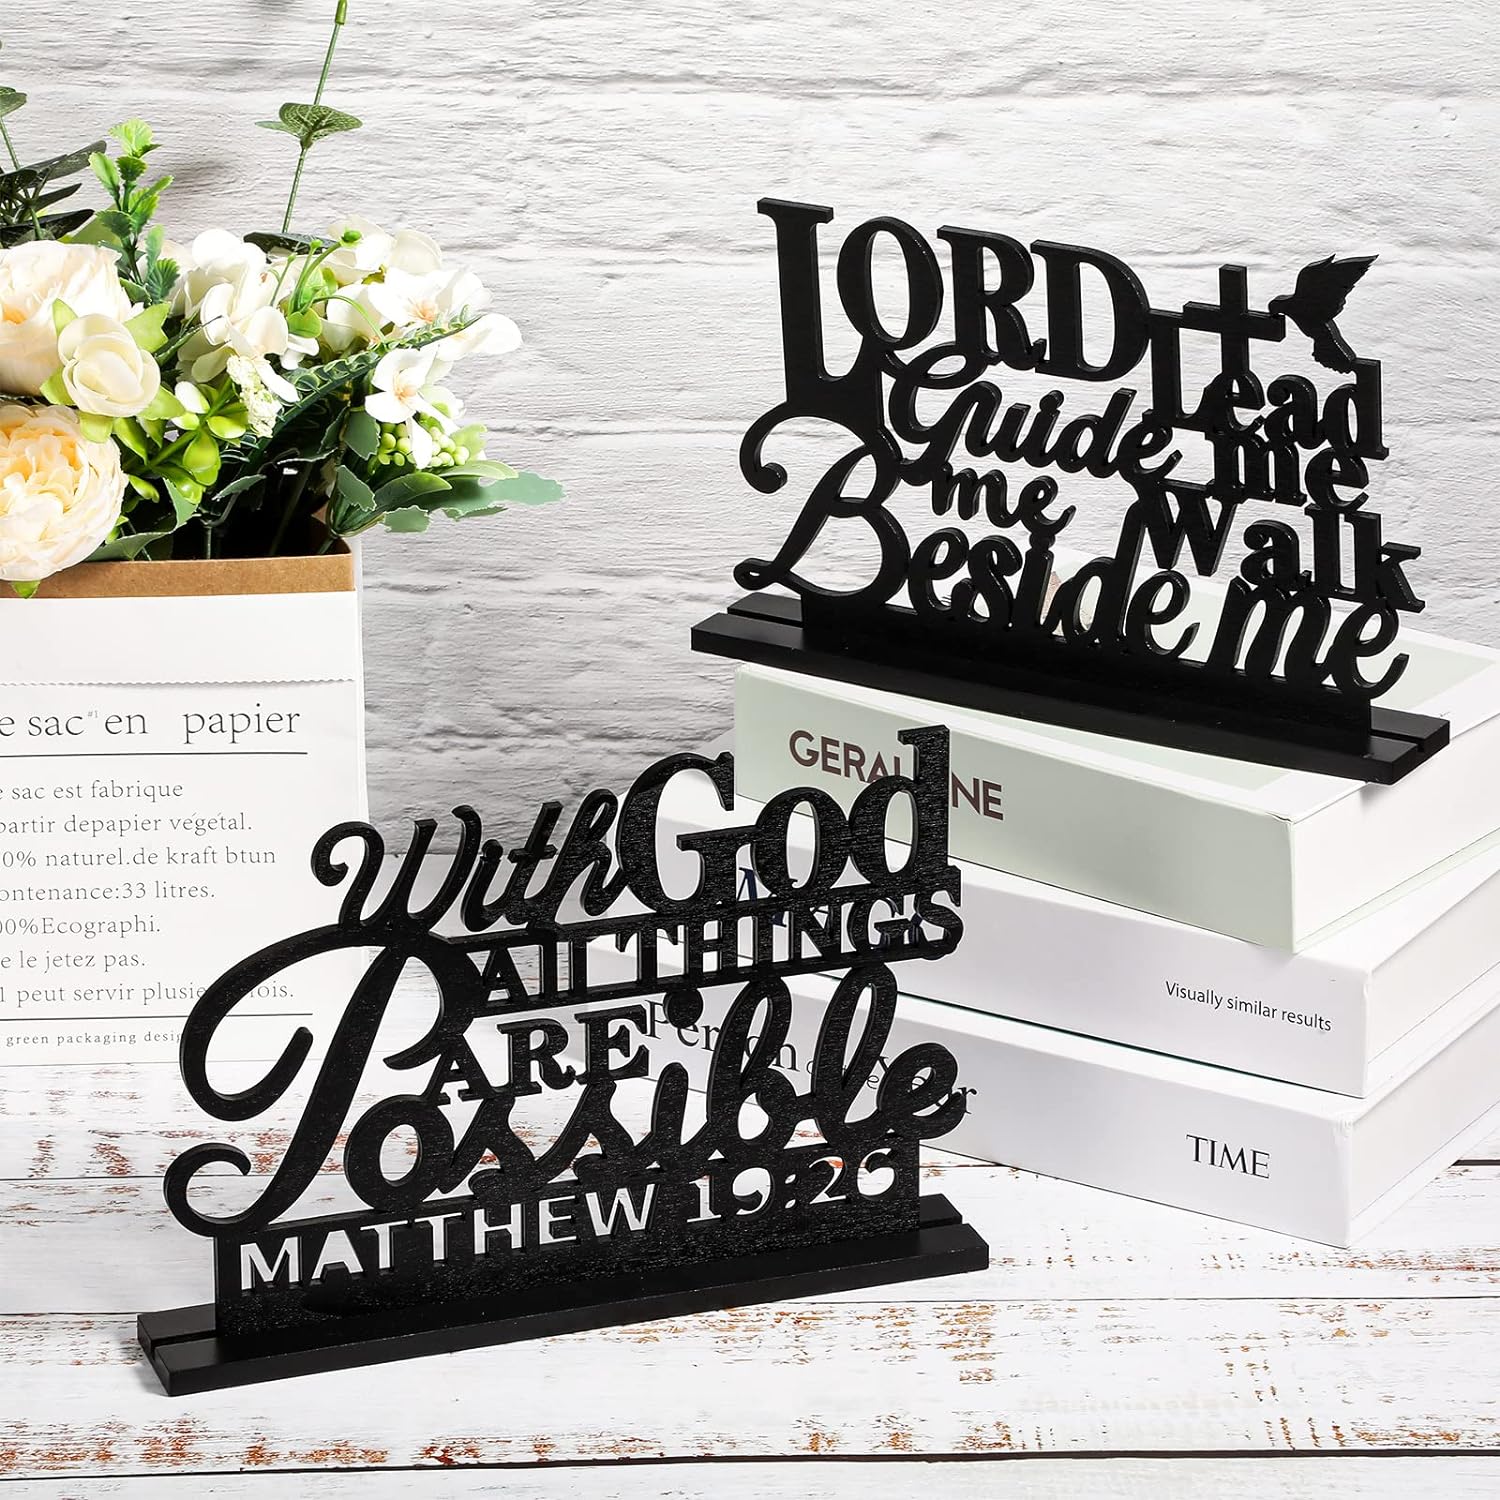 4 Pcs Inspirational Table Art Signs Motivational Table Centerpieces I Still Remember The Days Table Decor